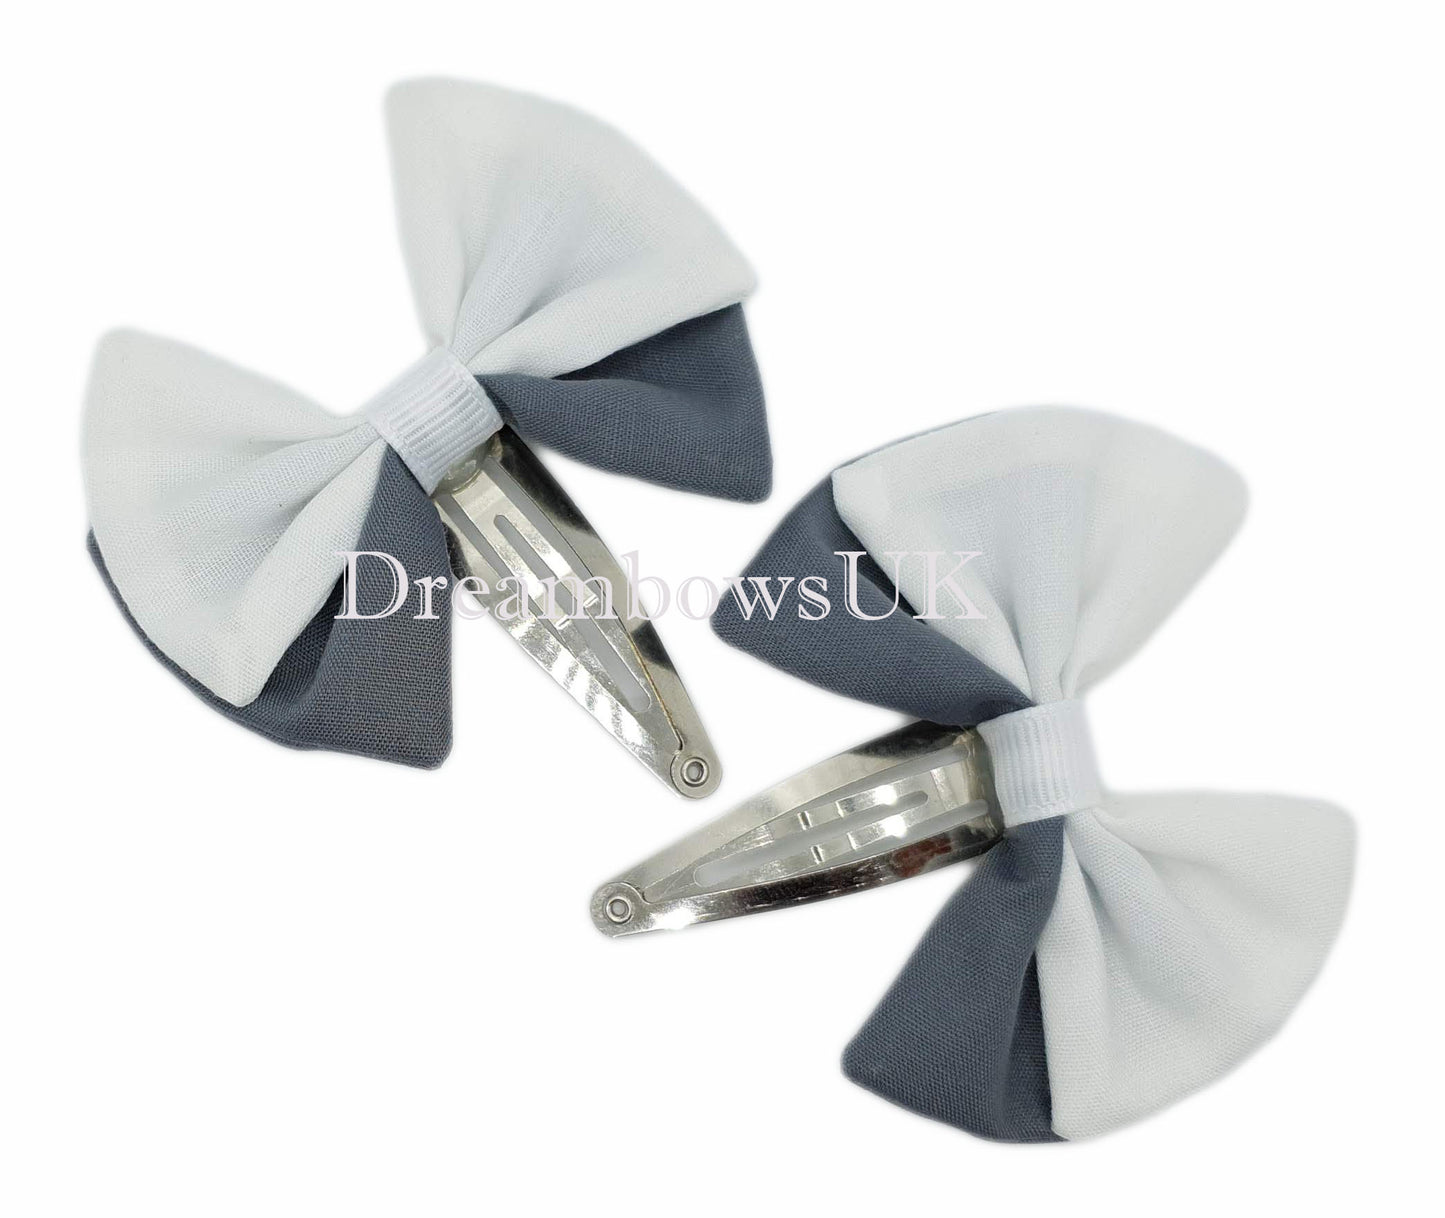 2x Grey and white fabric hair bows